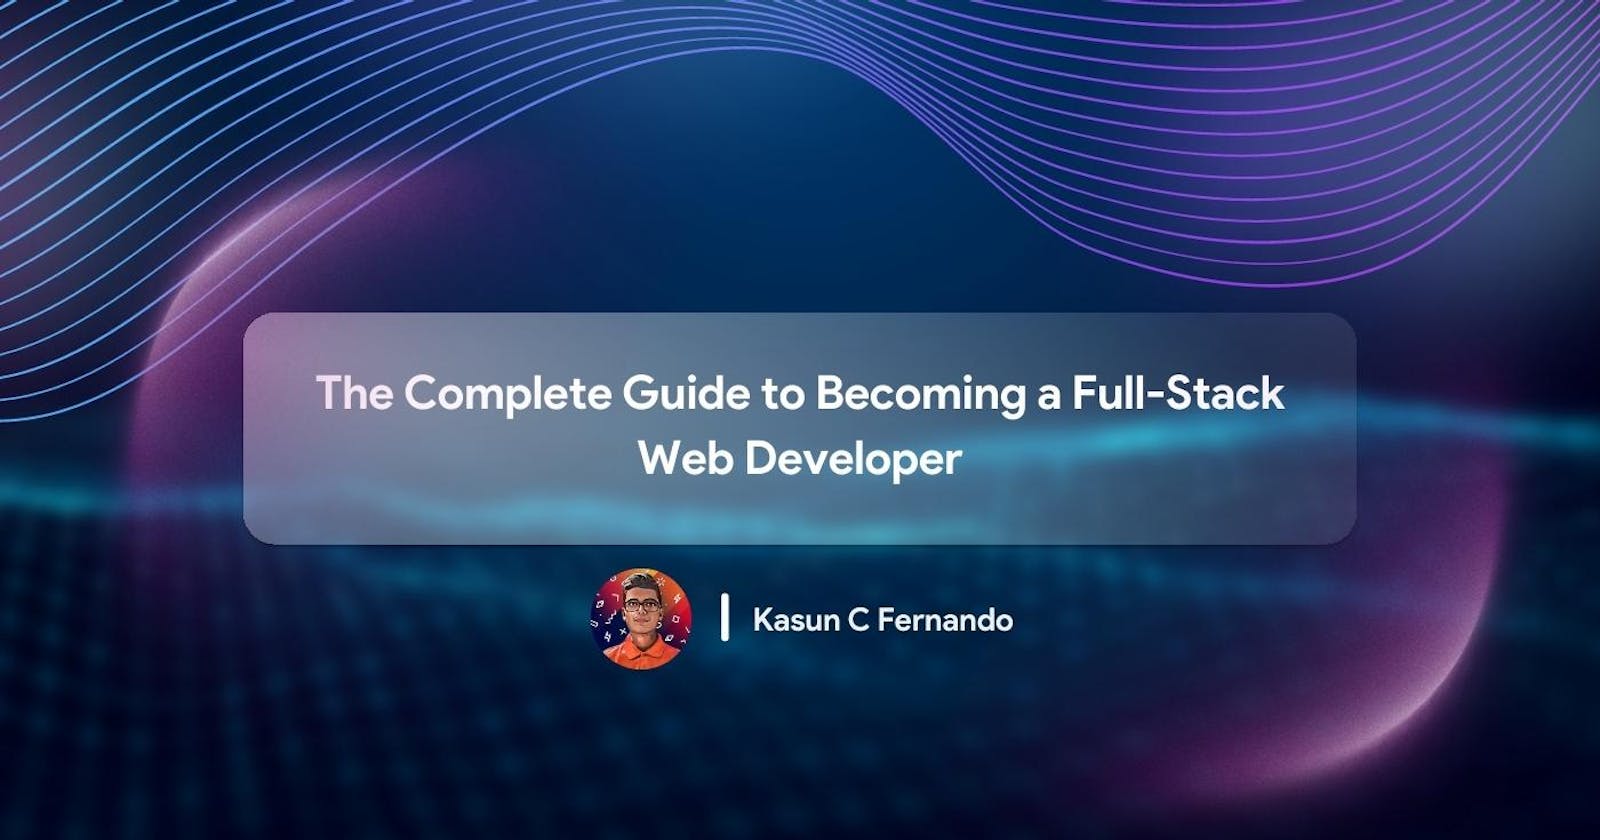 The Complete Guide to Becoming a Full-Stack Web Developer